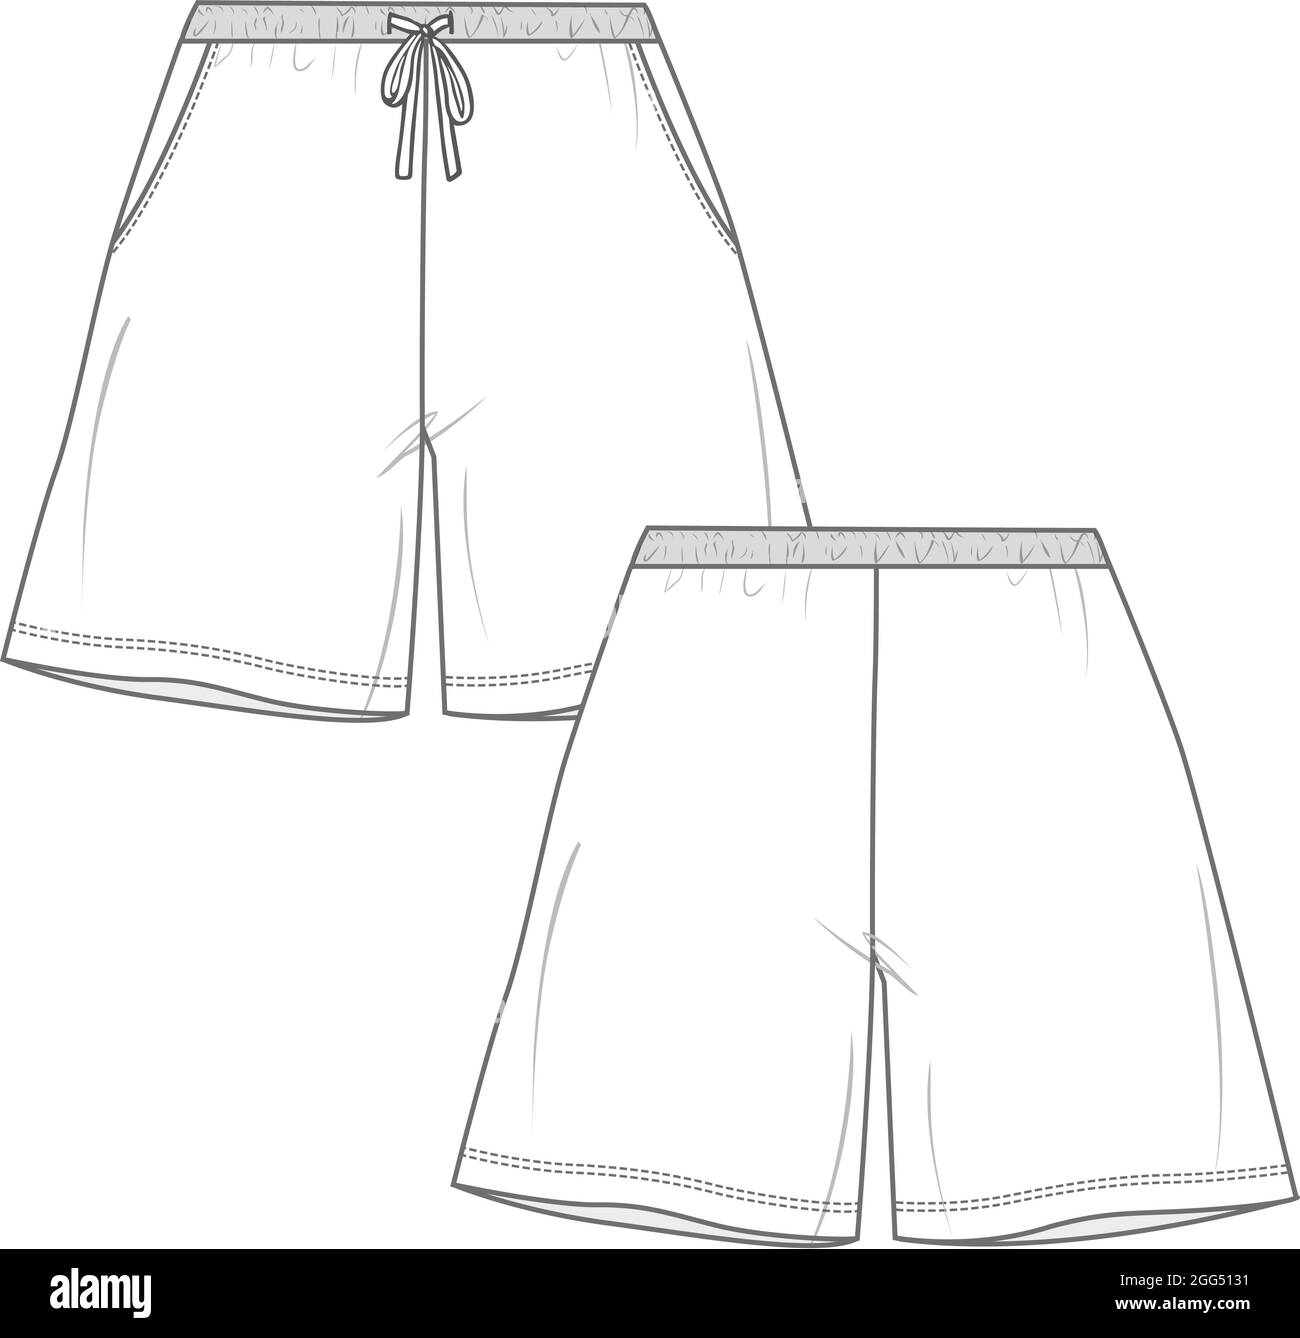 https://c8.alamy.com/comp/2GG5131/ladies-shorts-pant-fashion-flat-sketch-vector-illustration-template-front-and-back-view-technical-drawing-apparel-dress-design-short-pant-mock-up-2GG5131.jpg